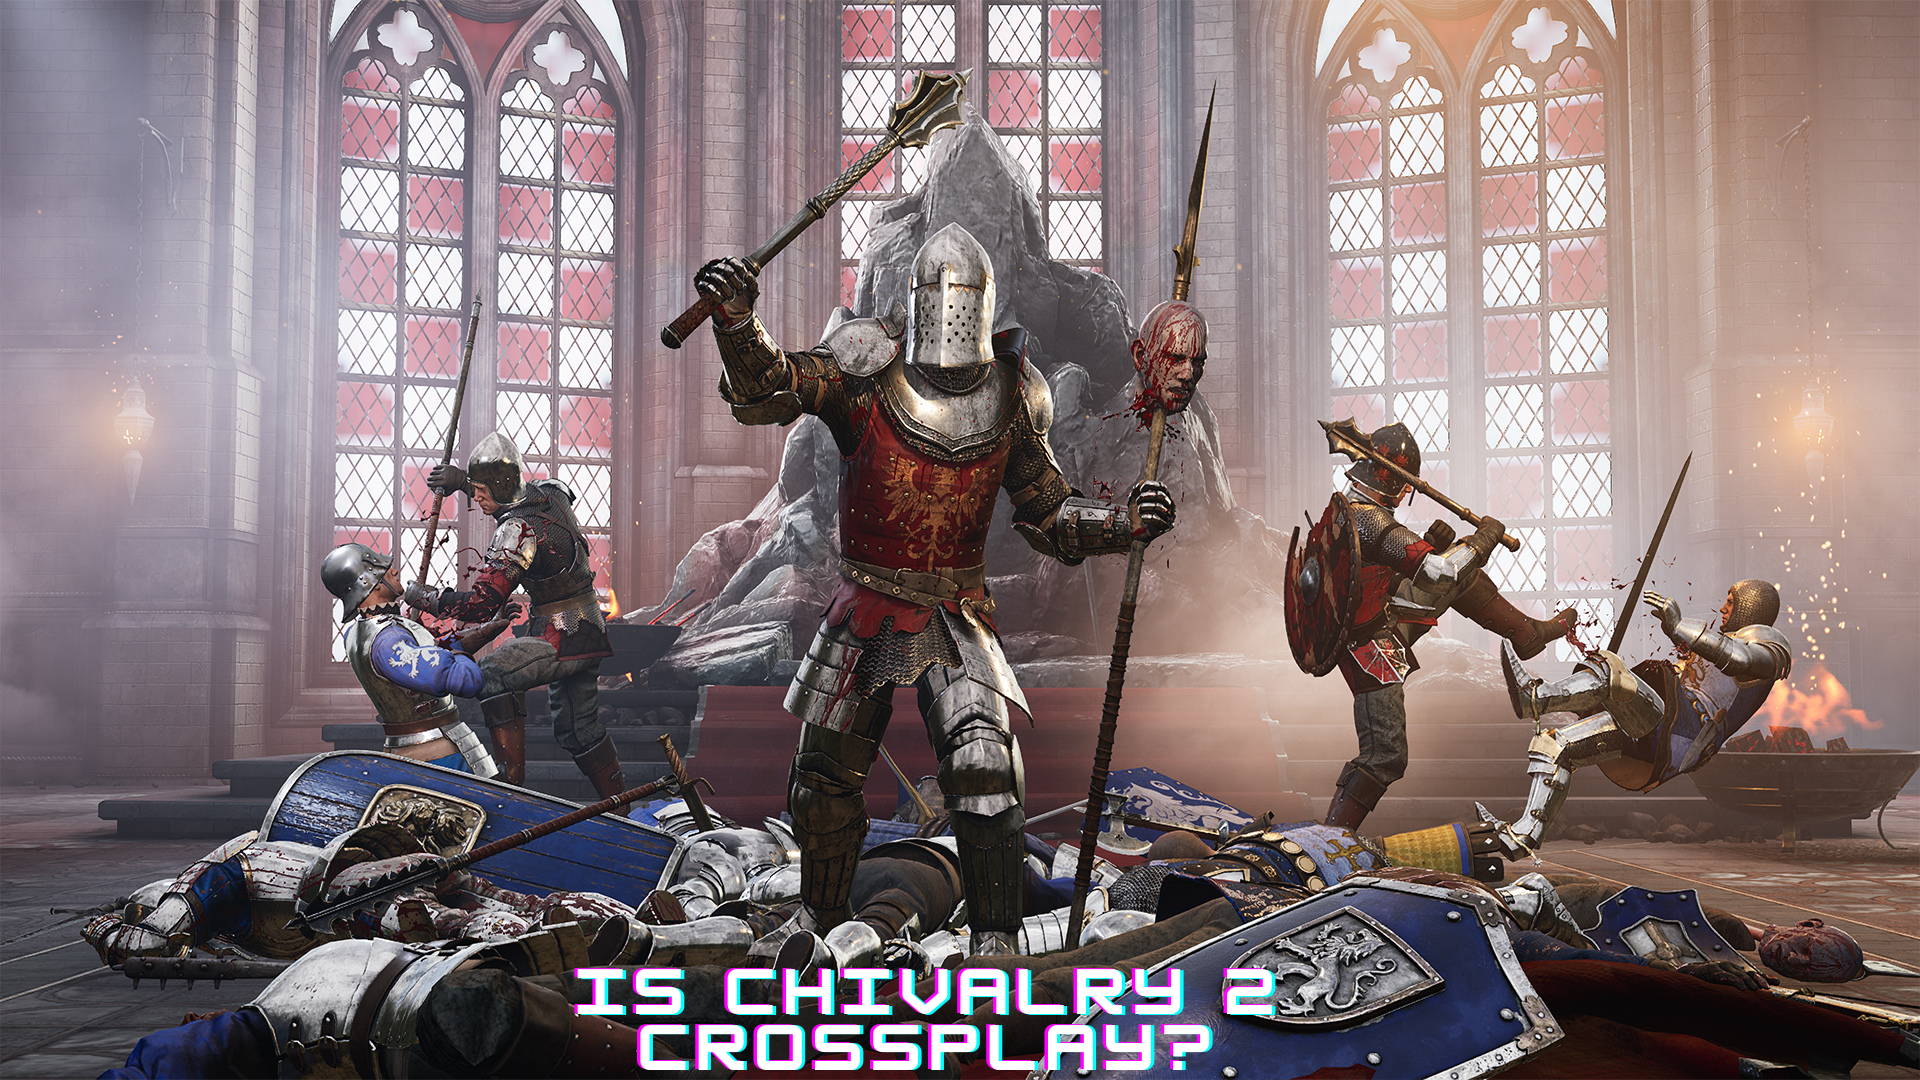 Is Chivalry 2 Crossplay?